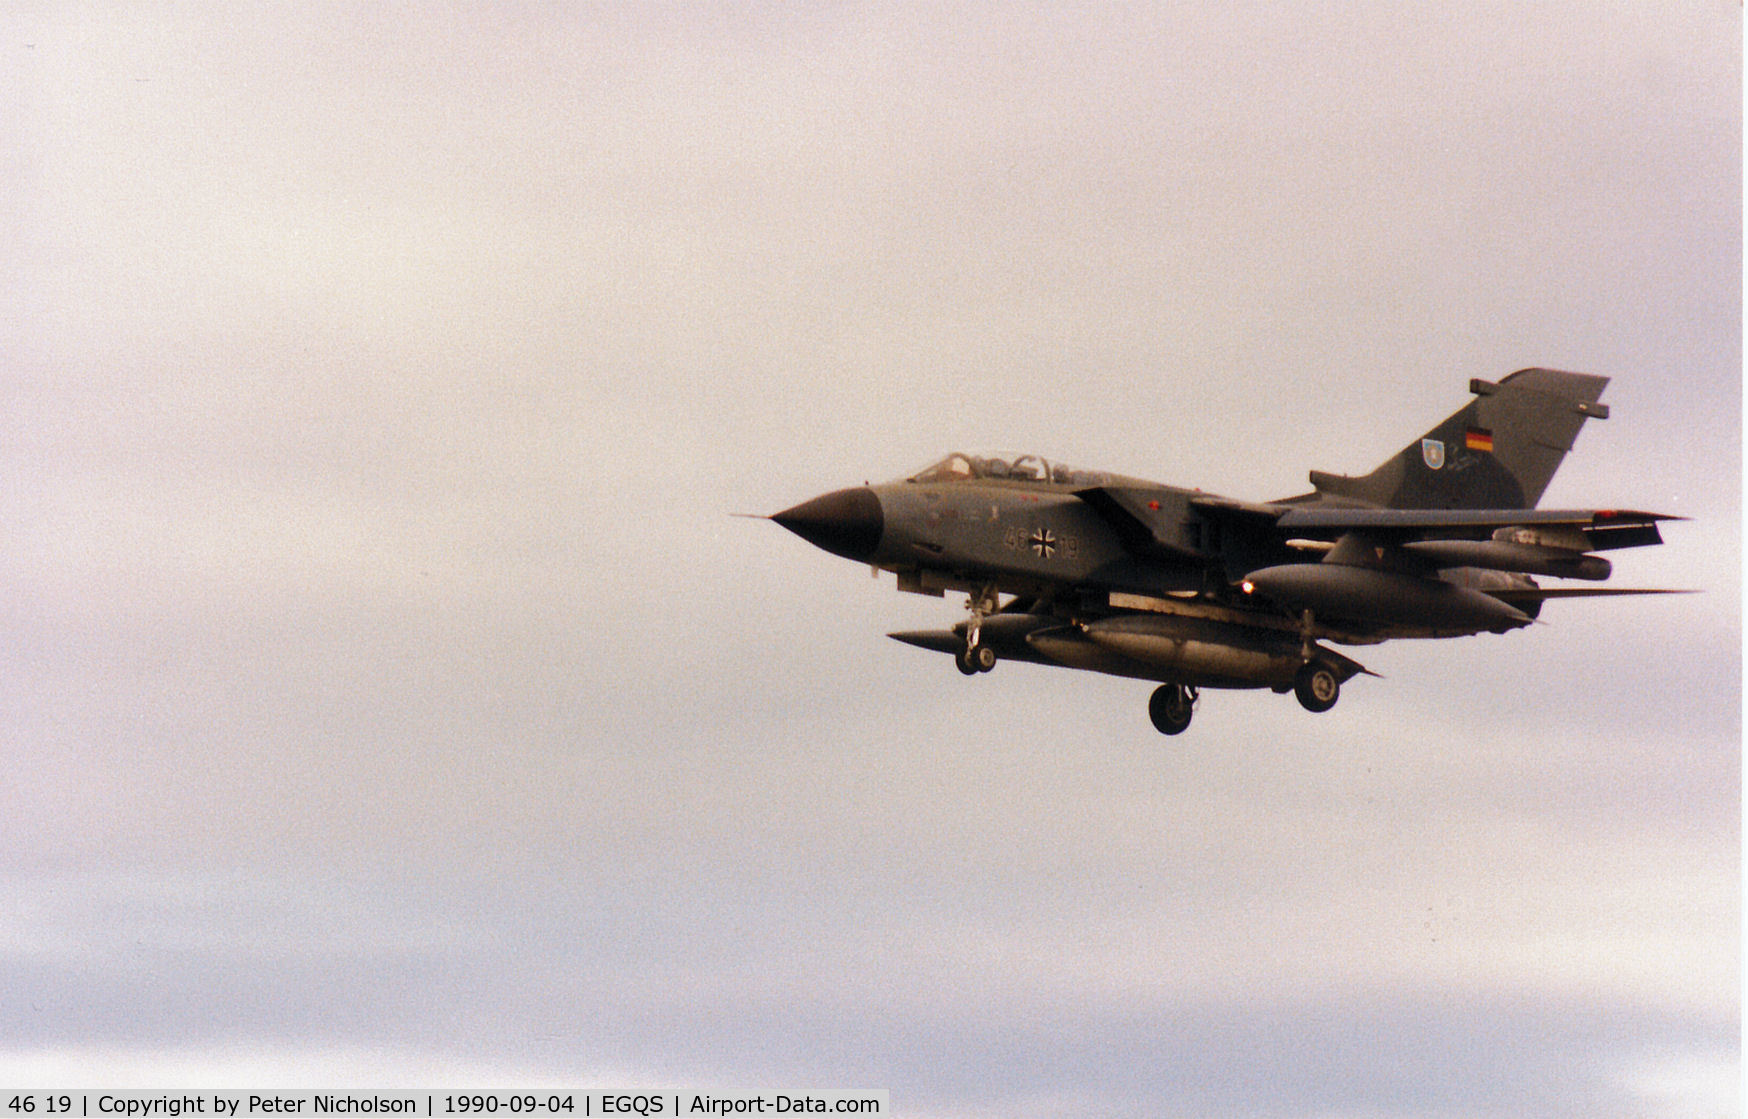 46 19, Panavia Tornado IDS C/N 792/GS252/4319, Tornado IDS of German Marineflieger MFG-2 on final approach to Runway 23 at RAF Lossiemouth in the Summer of 1990.